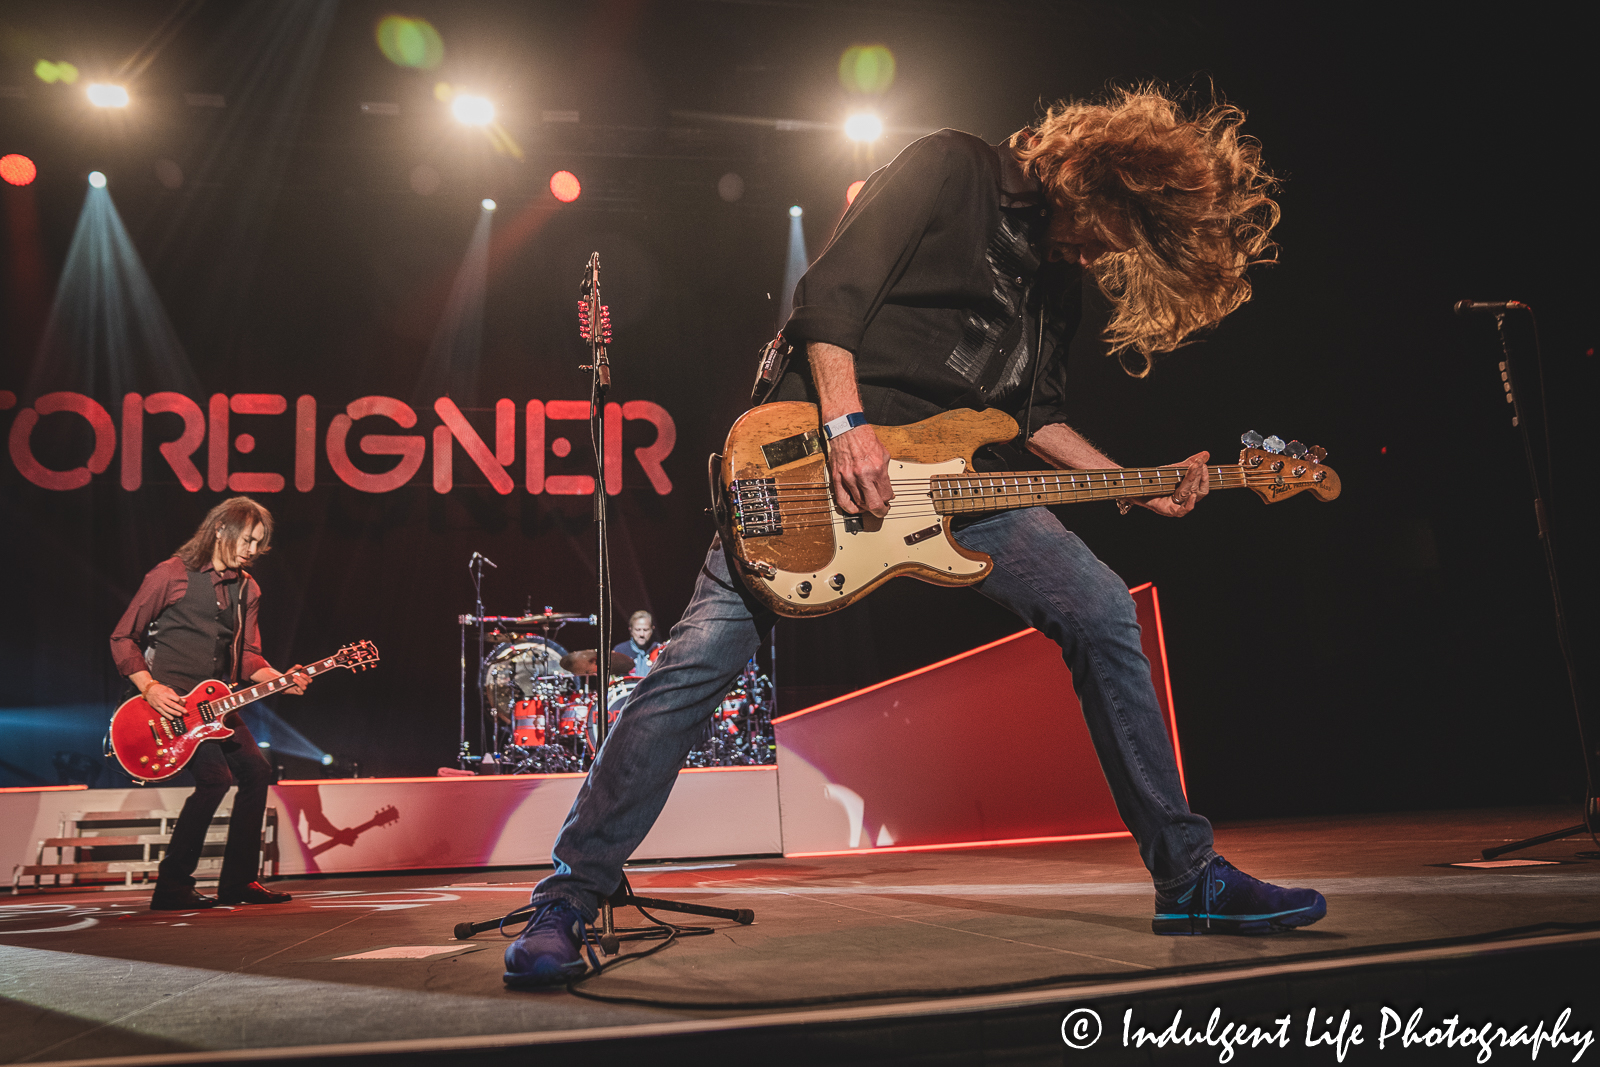 Foreigner bass guitar player Jeff Pilson performing with guitarist Luis Maldonado and drummer Chris Frazier at Hartman Arena in Park City, KS on April 30, 2023.